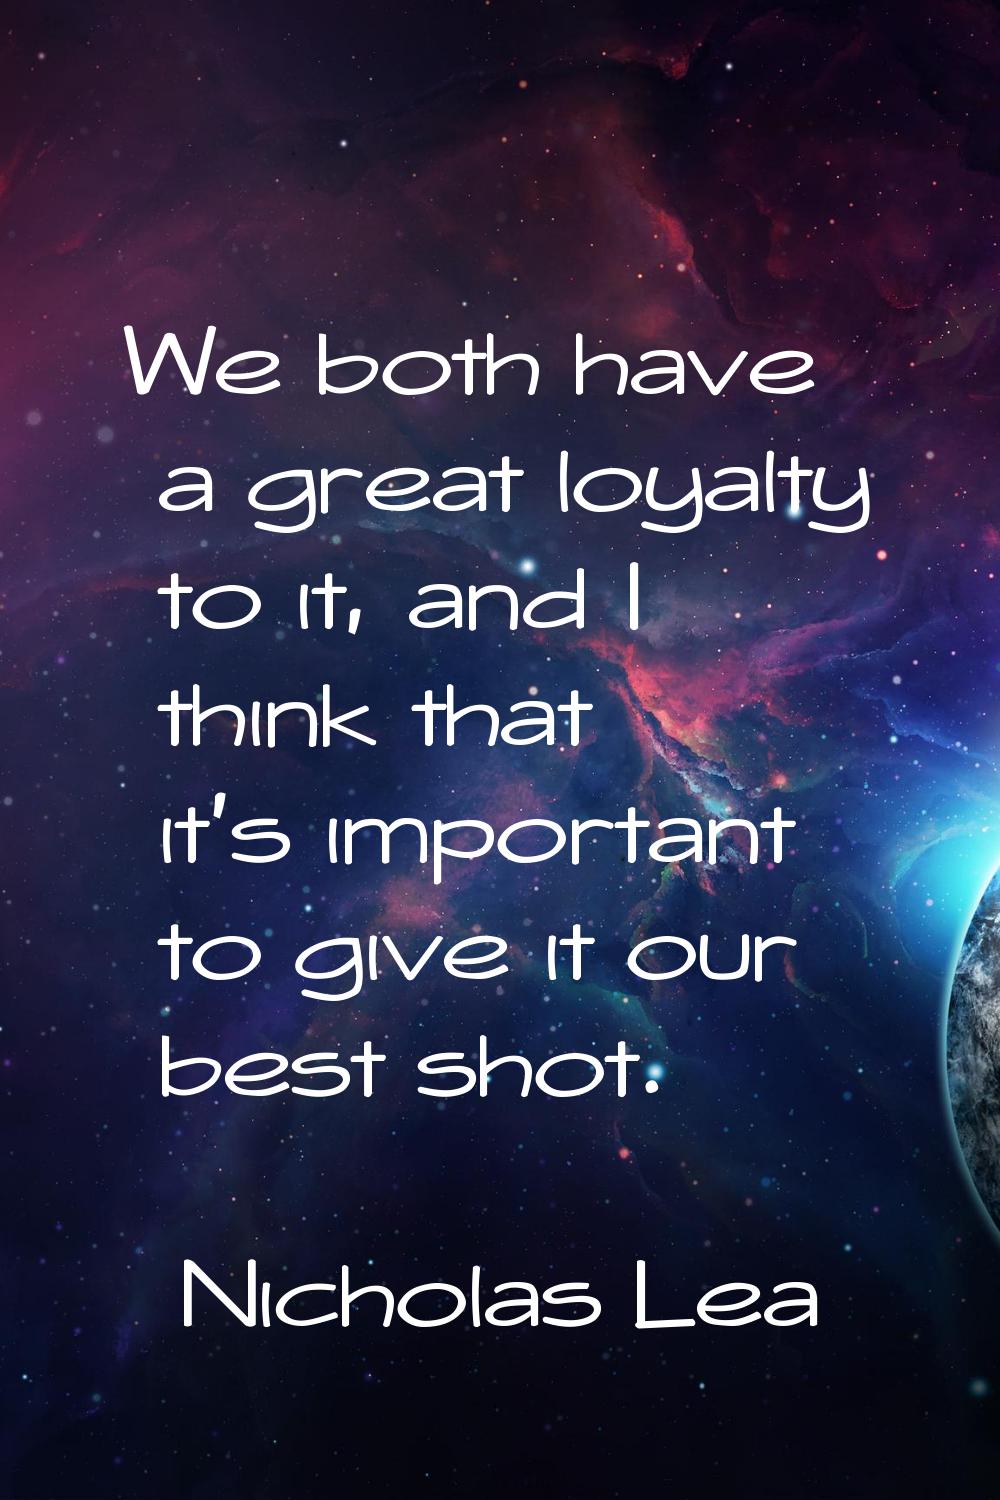 We both have a great loyalty to it, and I think that it's important to give it our best shot.